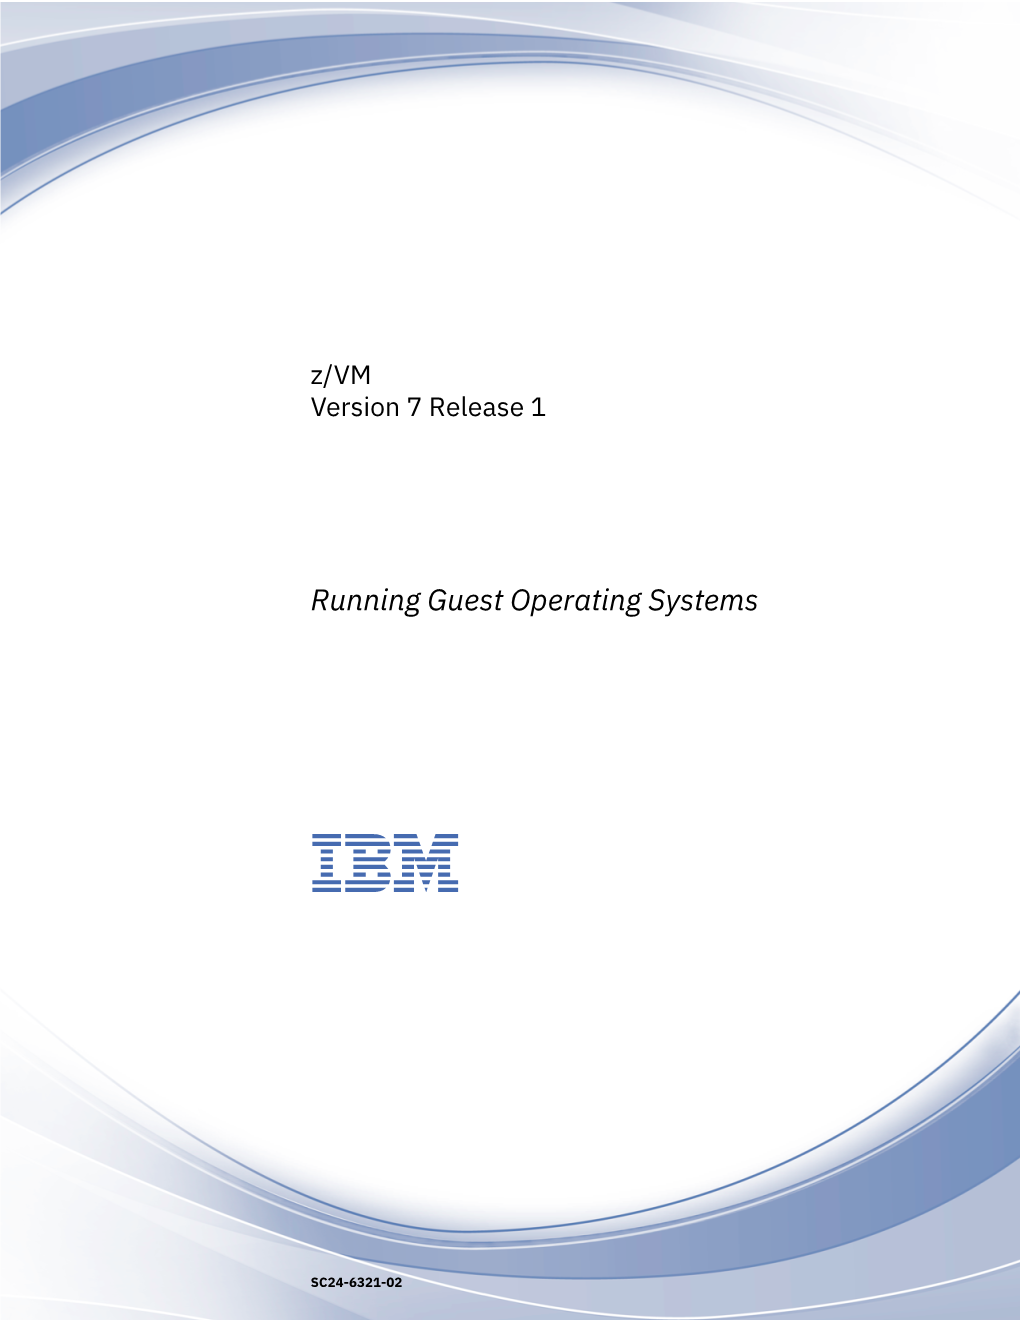 Z/VM: Z/VM V7.1 Running Guest Operating Systems How to Send Your Comments to IBM